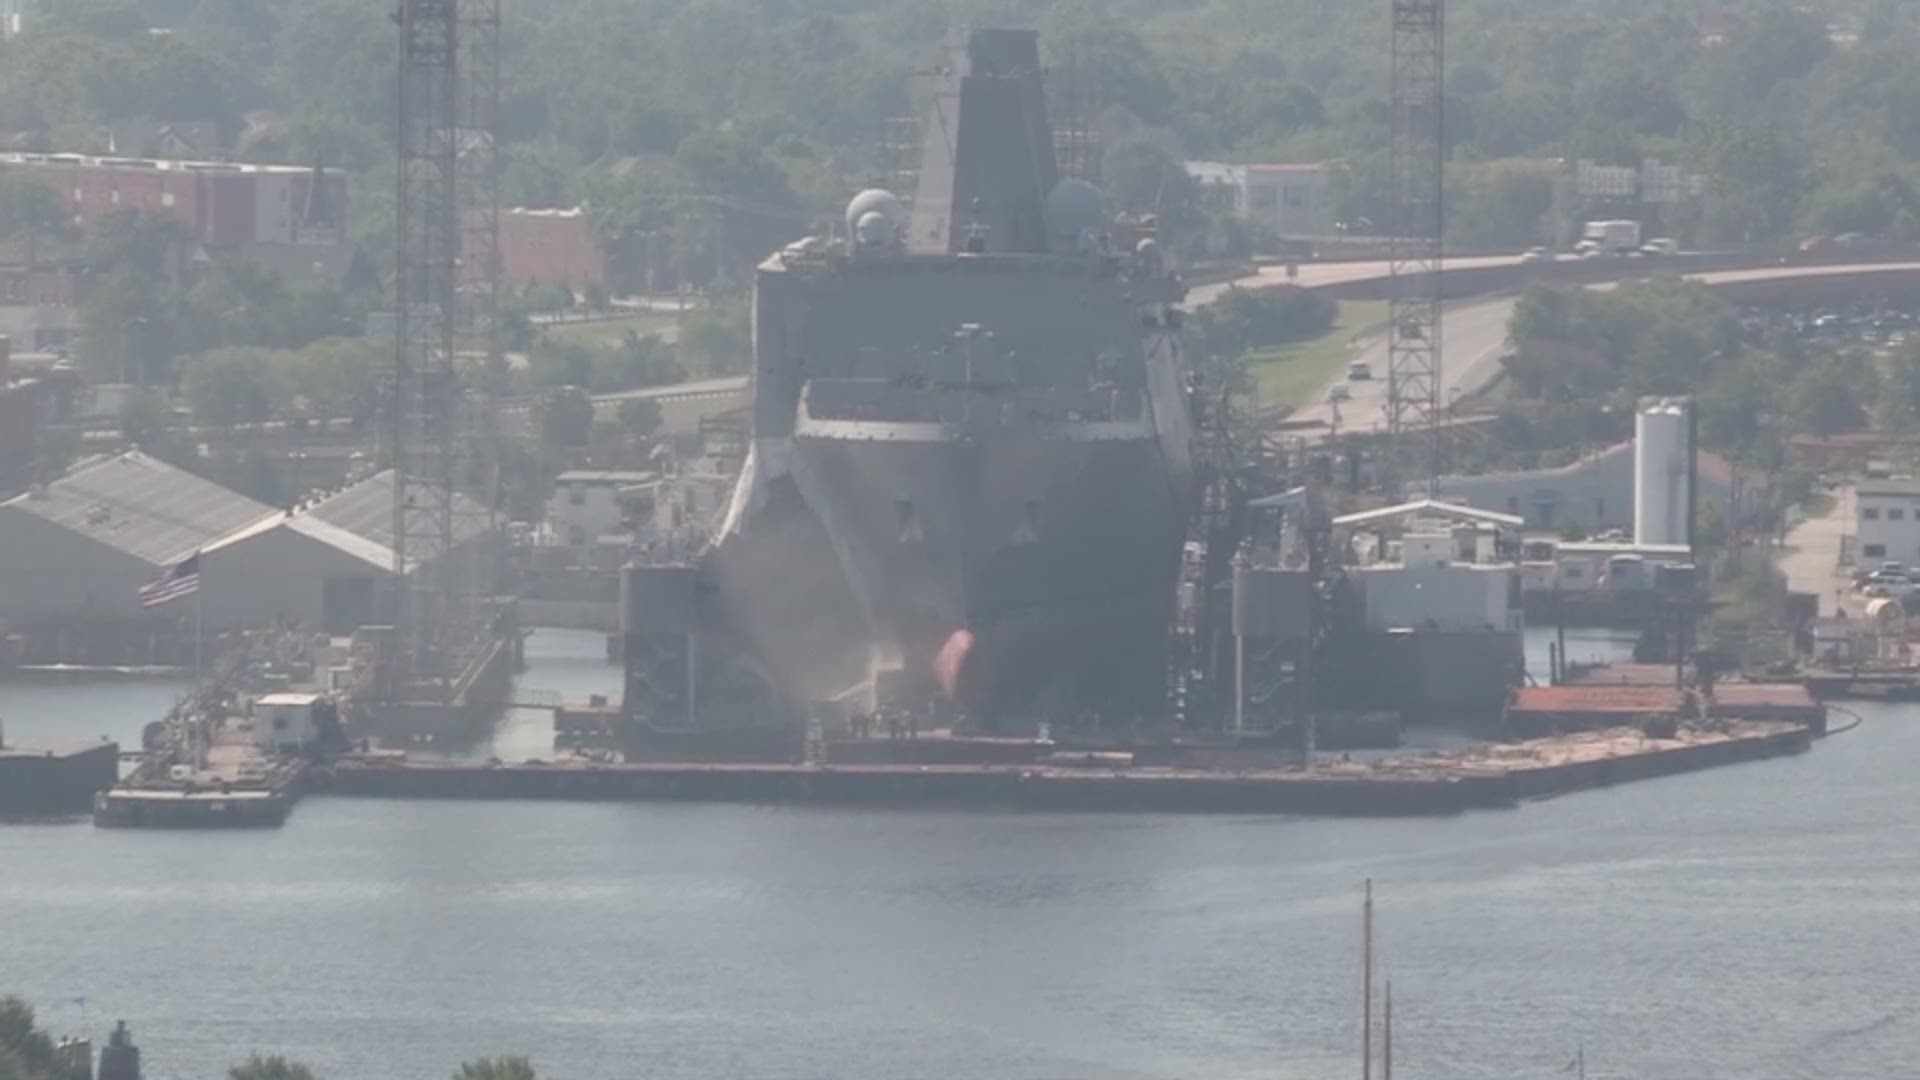 7/17/18: A fire broke out alongside USS Mesa Verde, which is in drydock for maintenance and repairs at General Dynamics NASSCO-Norfolk